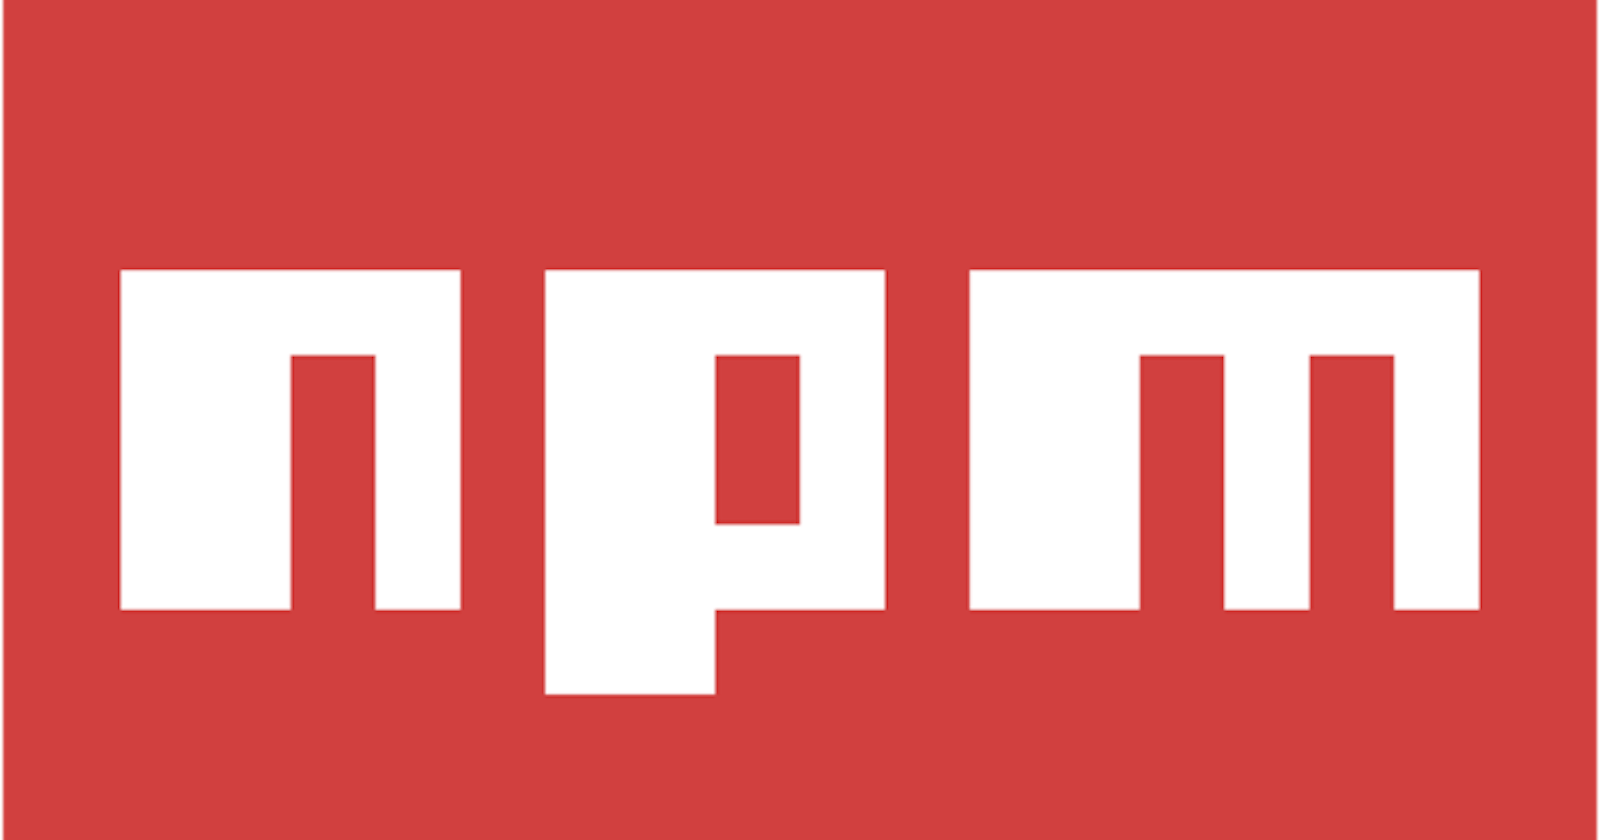 Bootstrap your next project with npm init